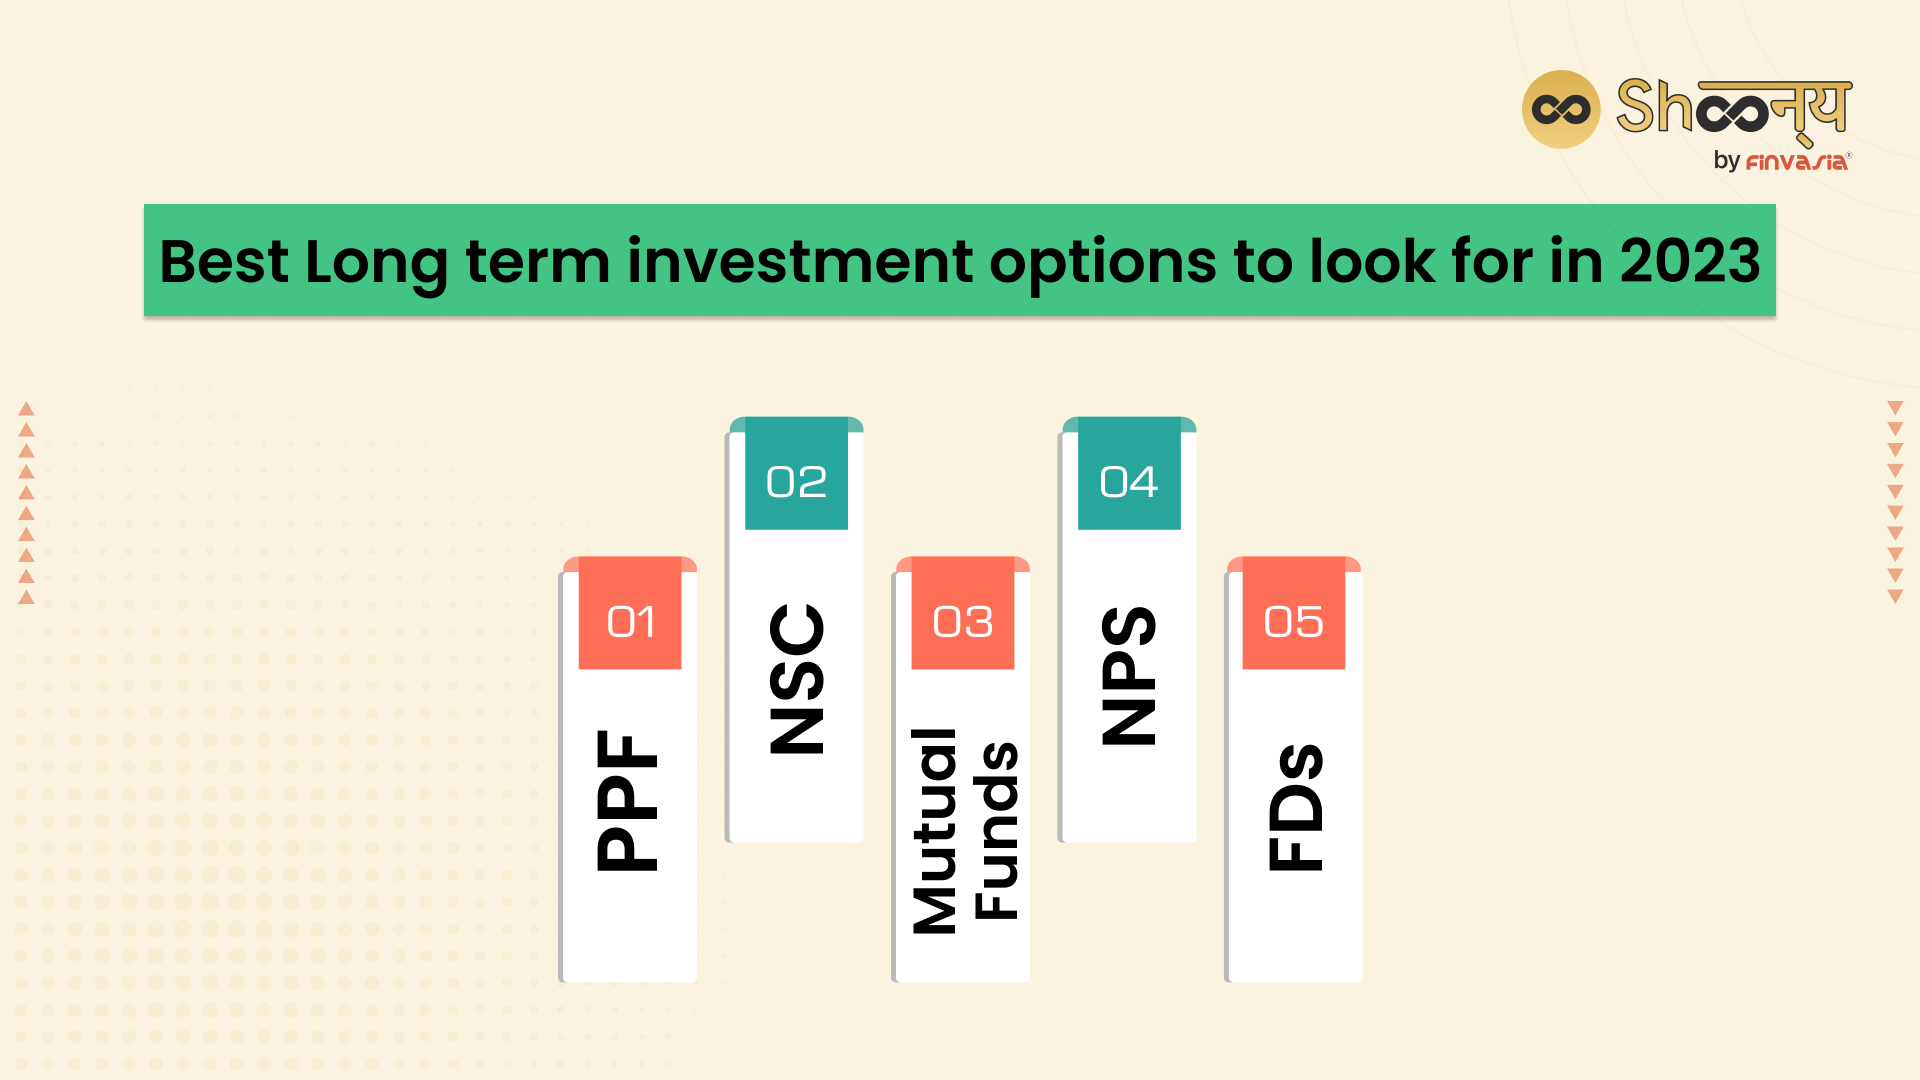 Best Long term investment options to look for in 2023